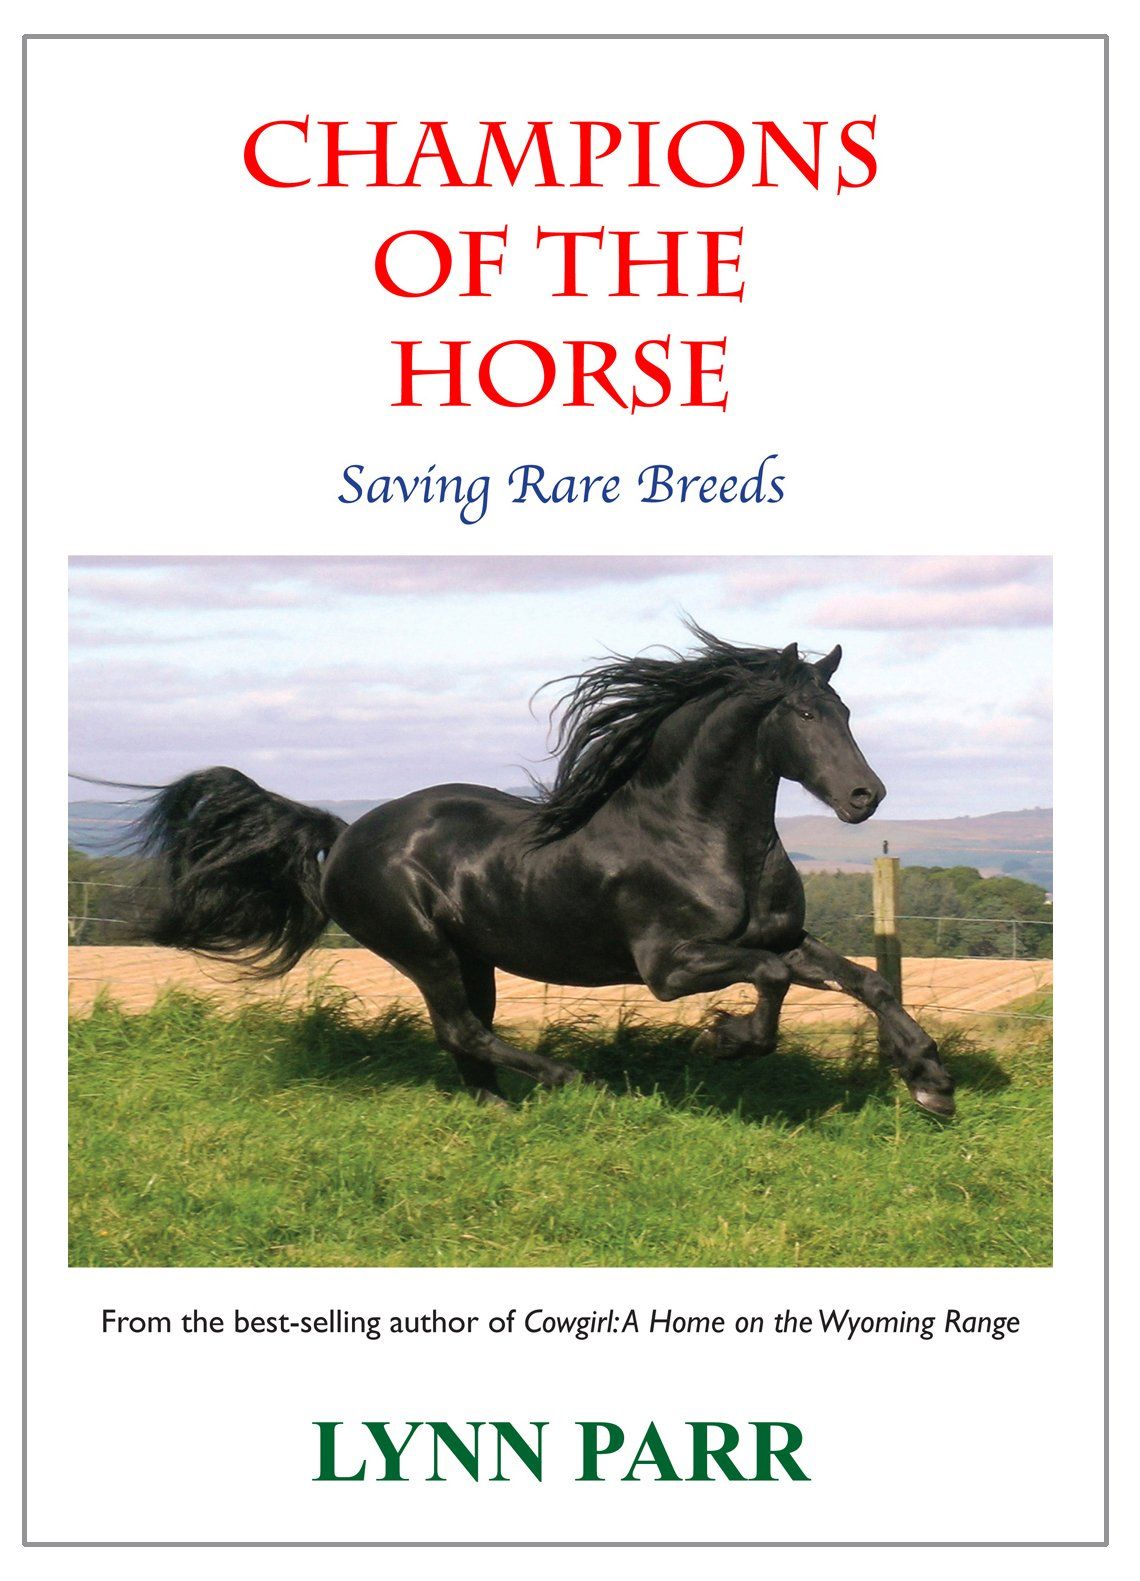 lynn_parr_champions_of-the_horse